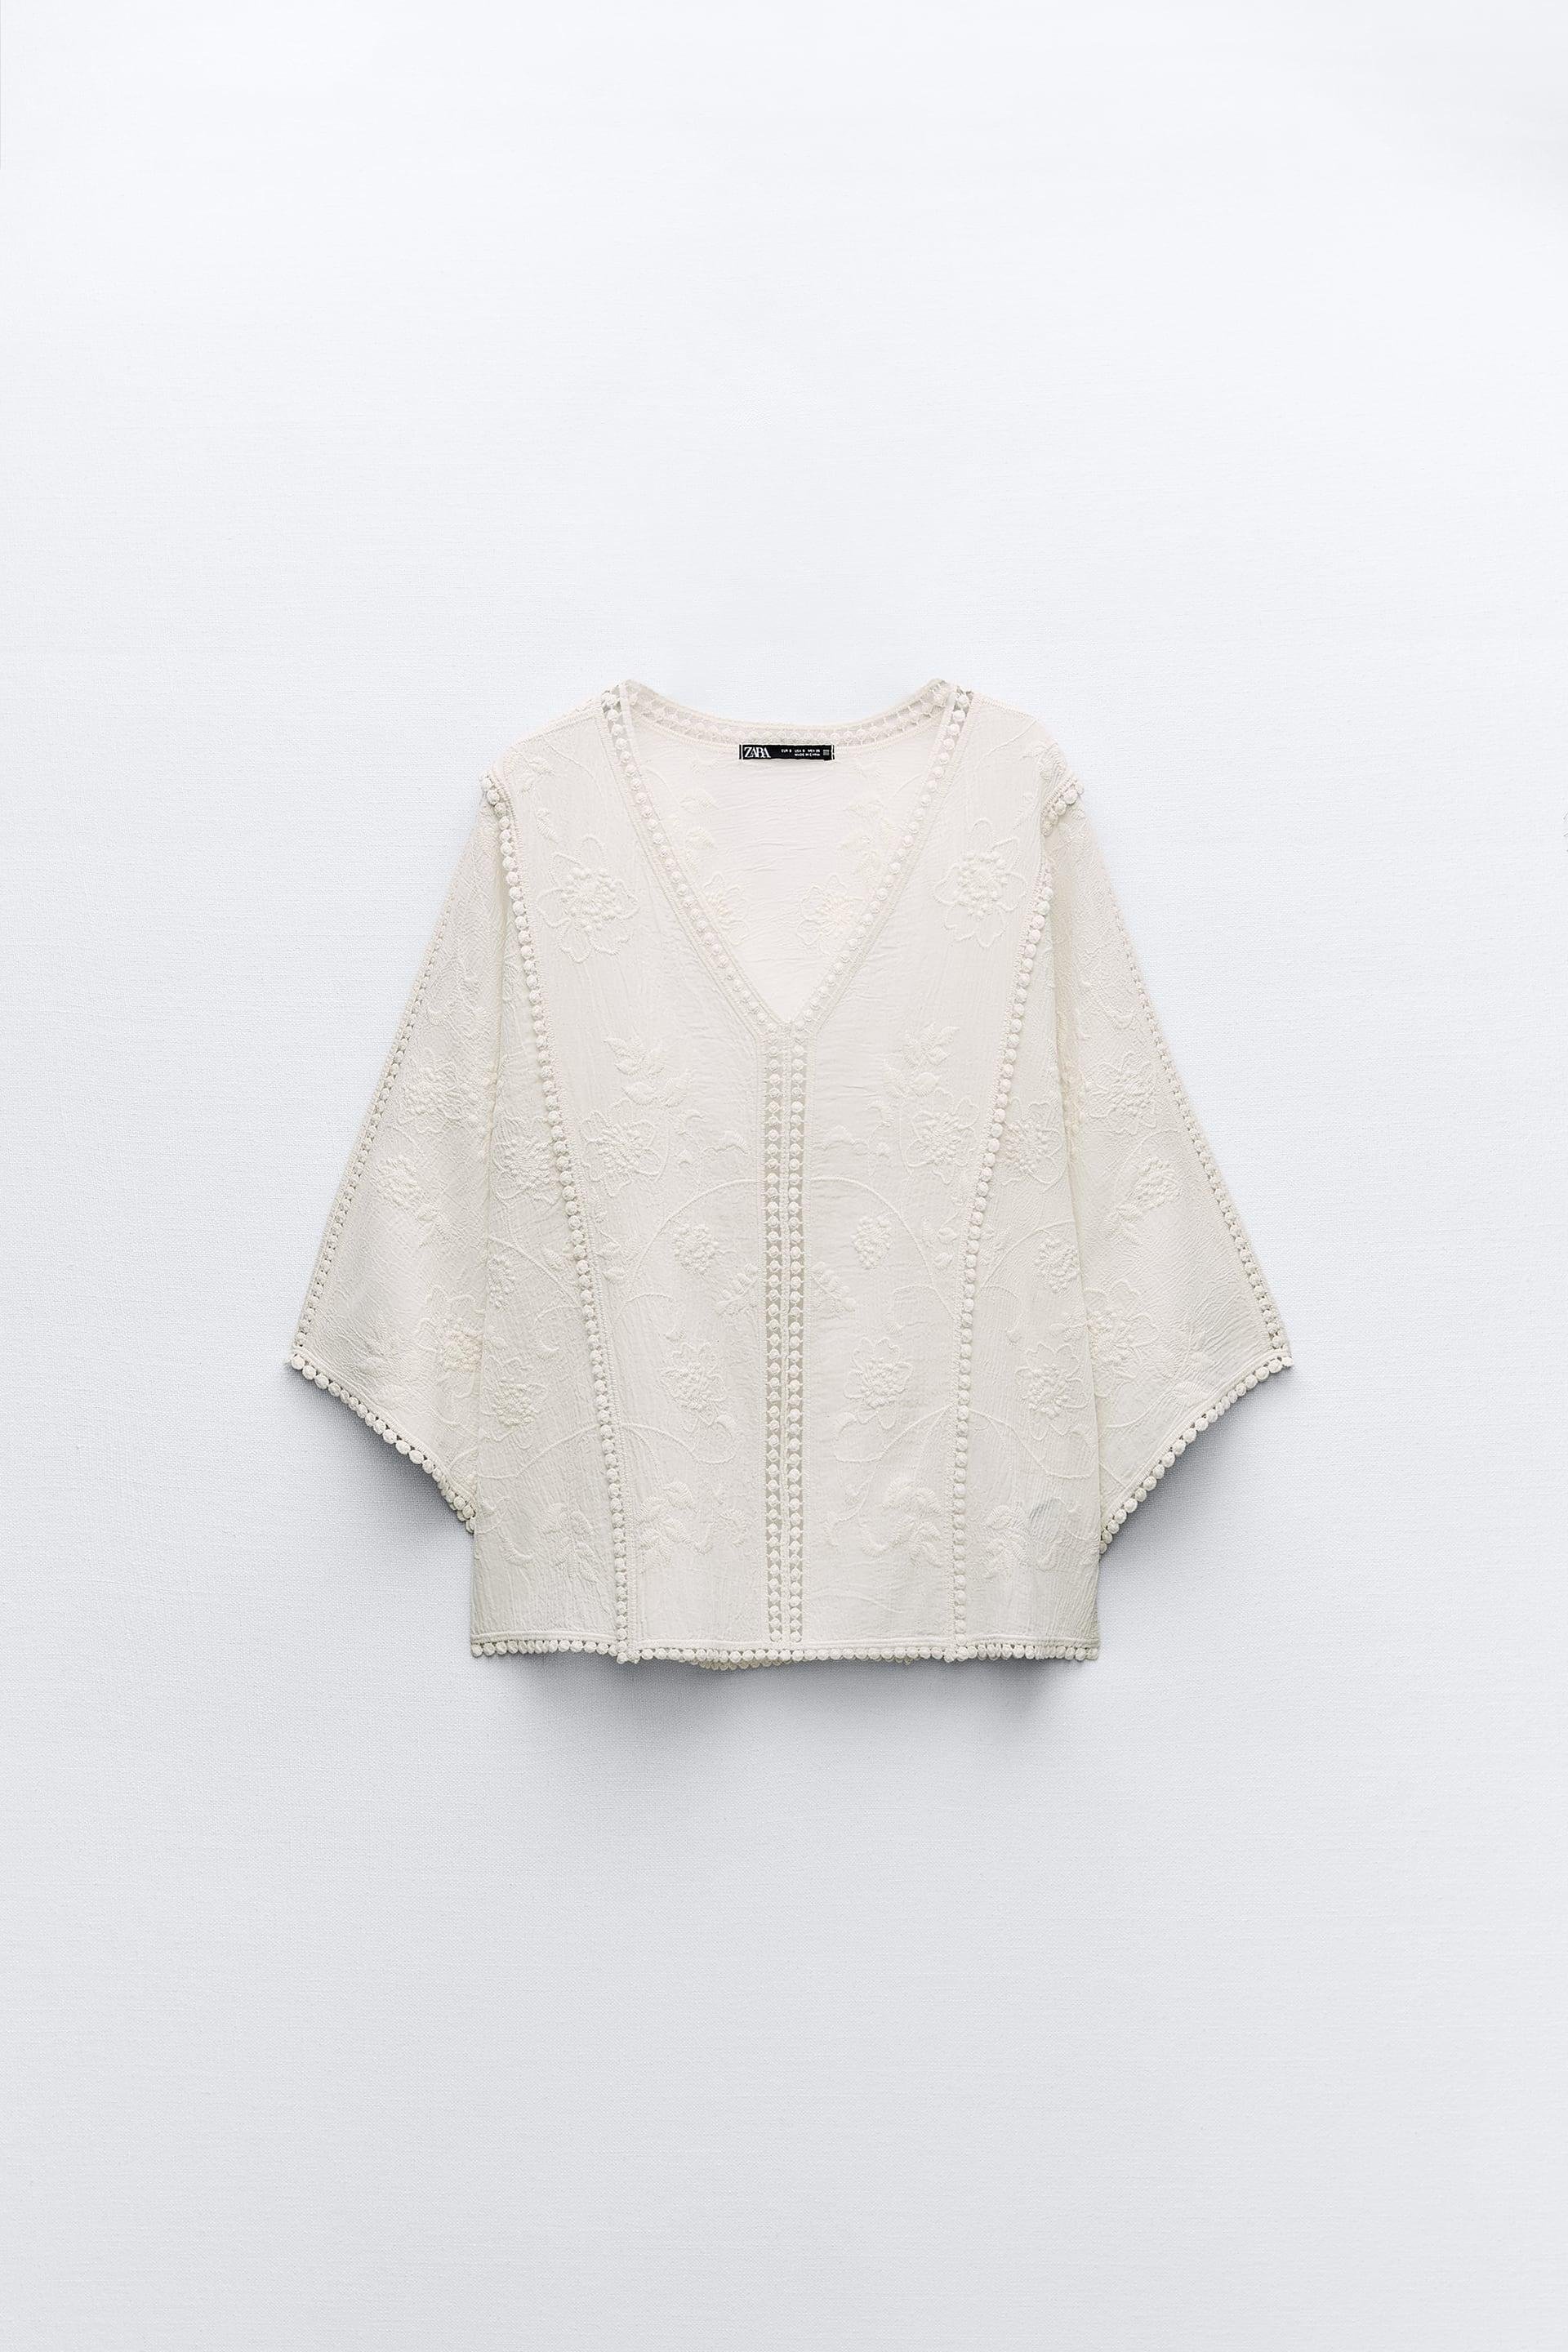 EMBROIDERED BLOUSE by ZARA